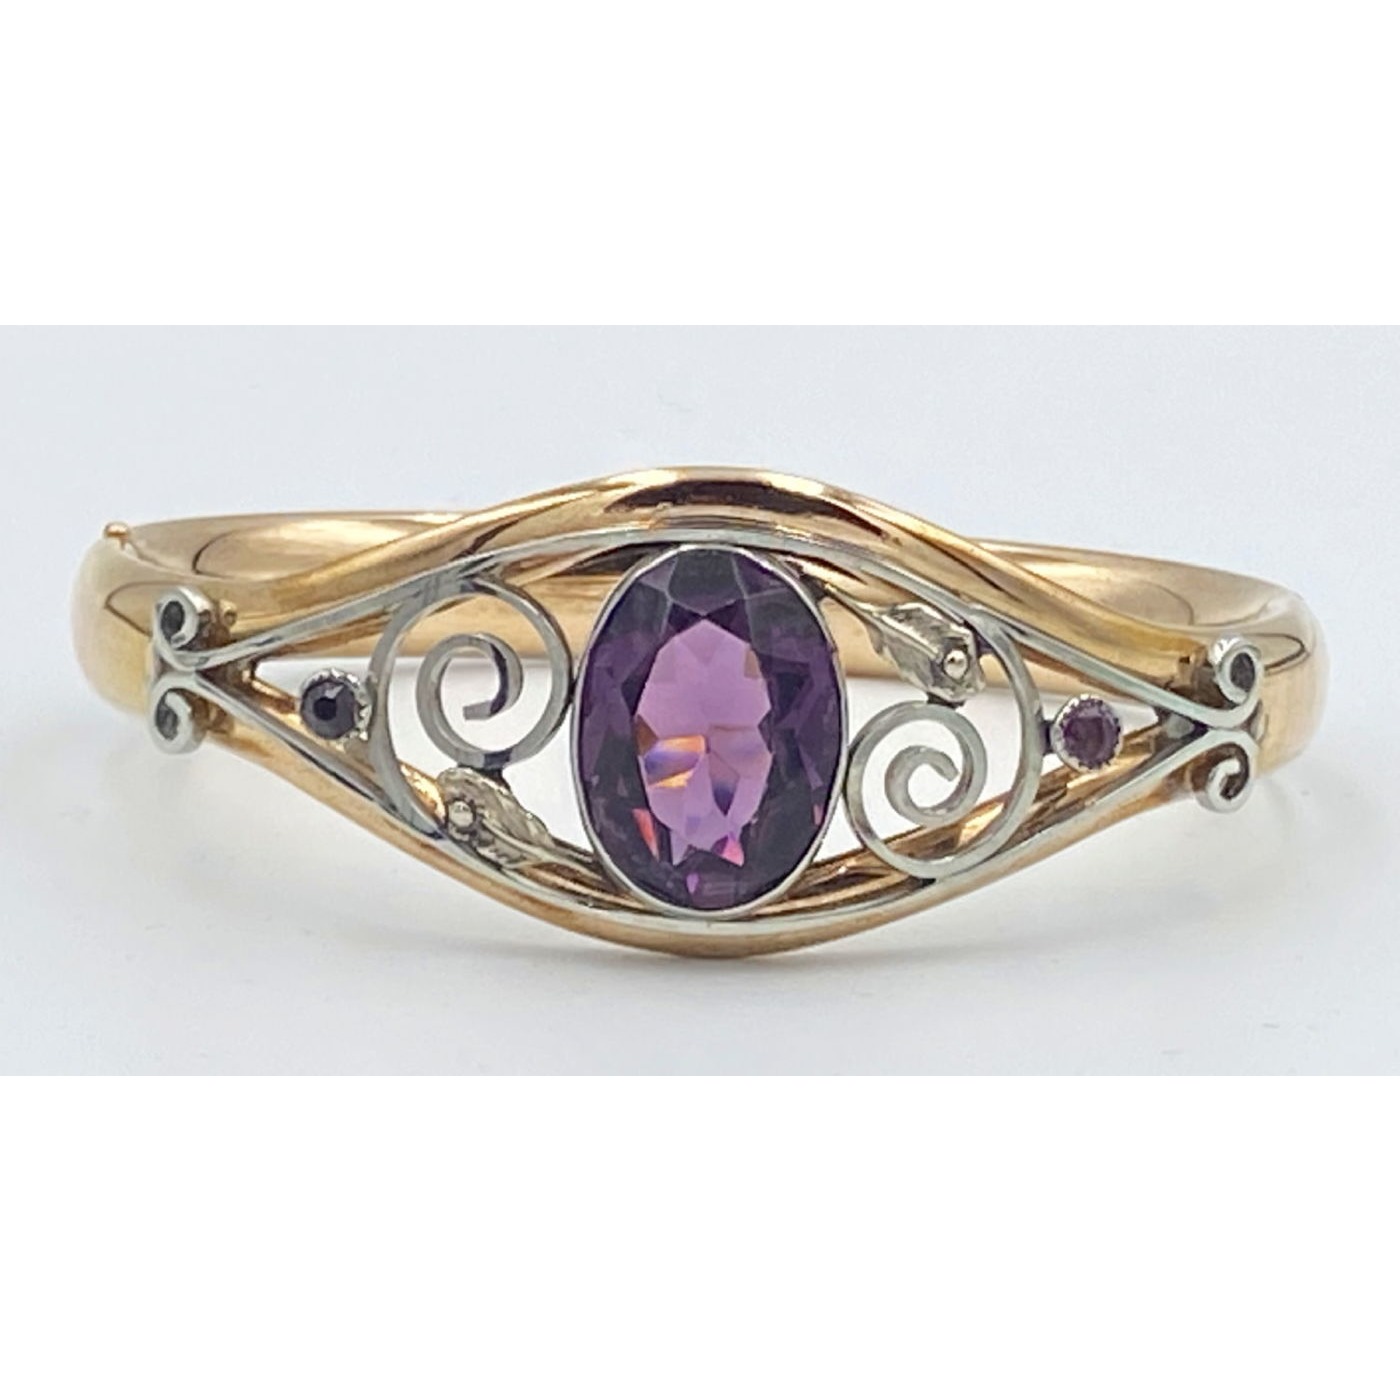 Unusual Smaller Bangle with Central Purple Stone & Silver Wirework Highlights